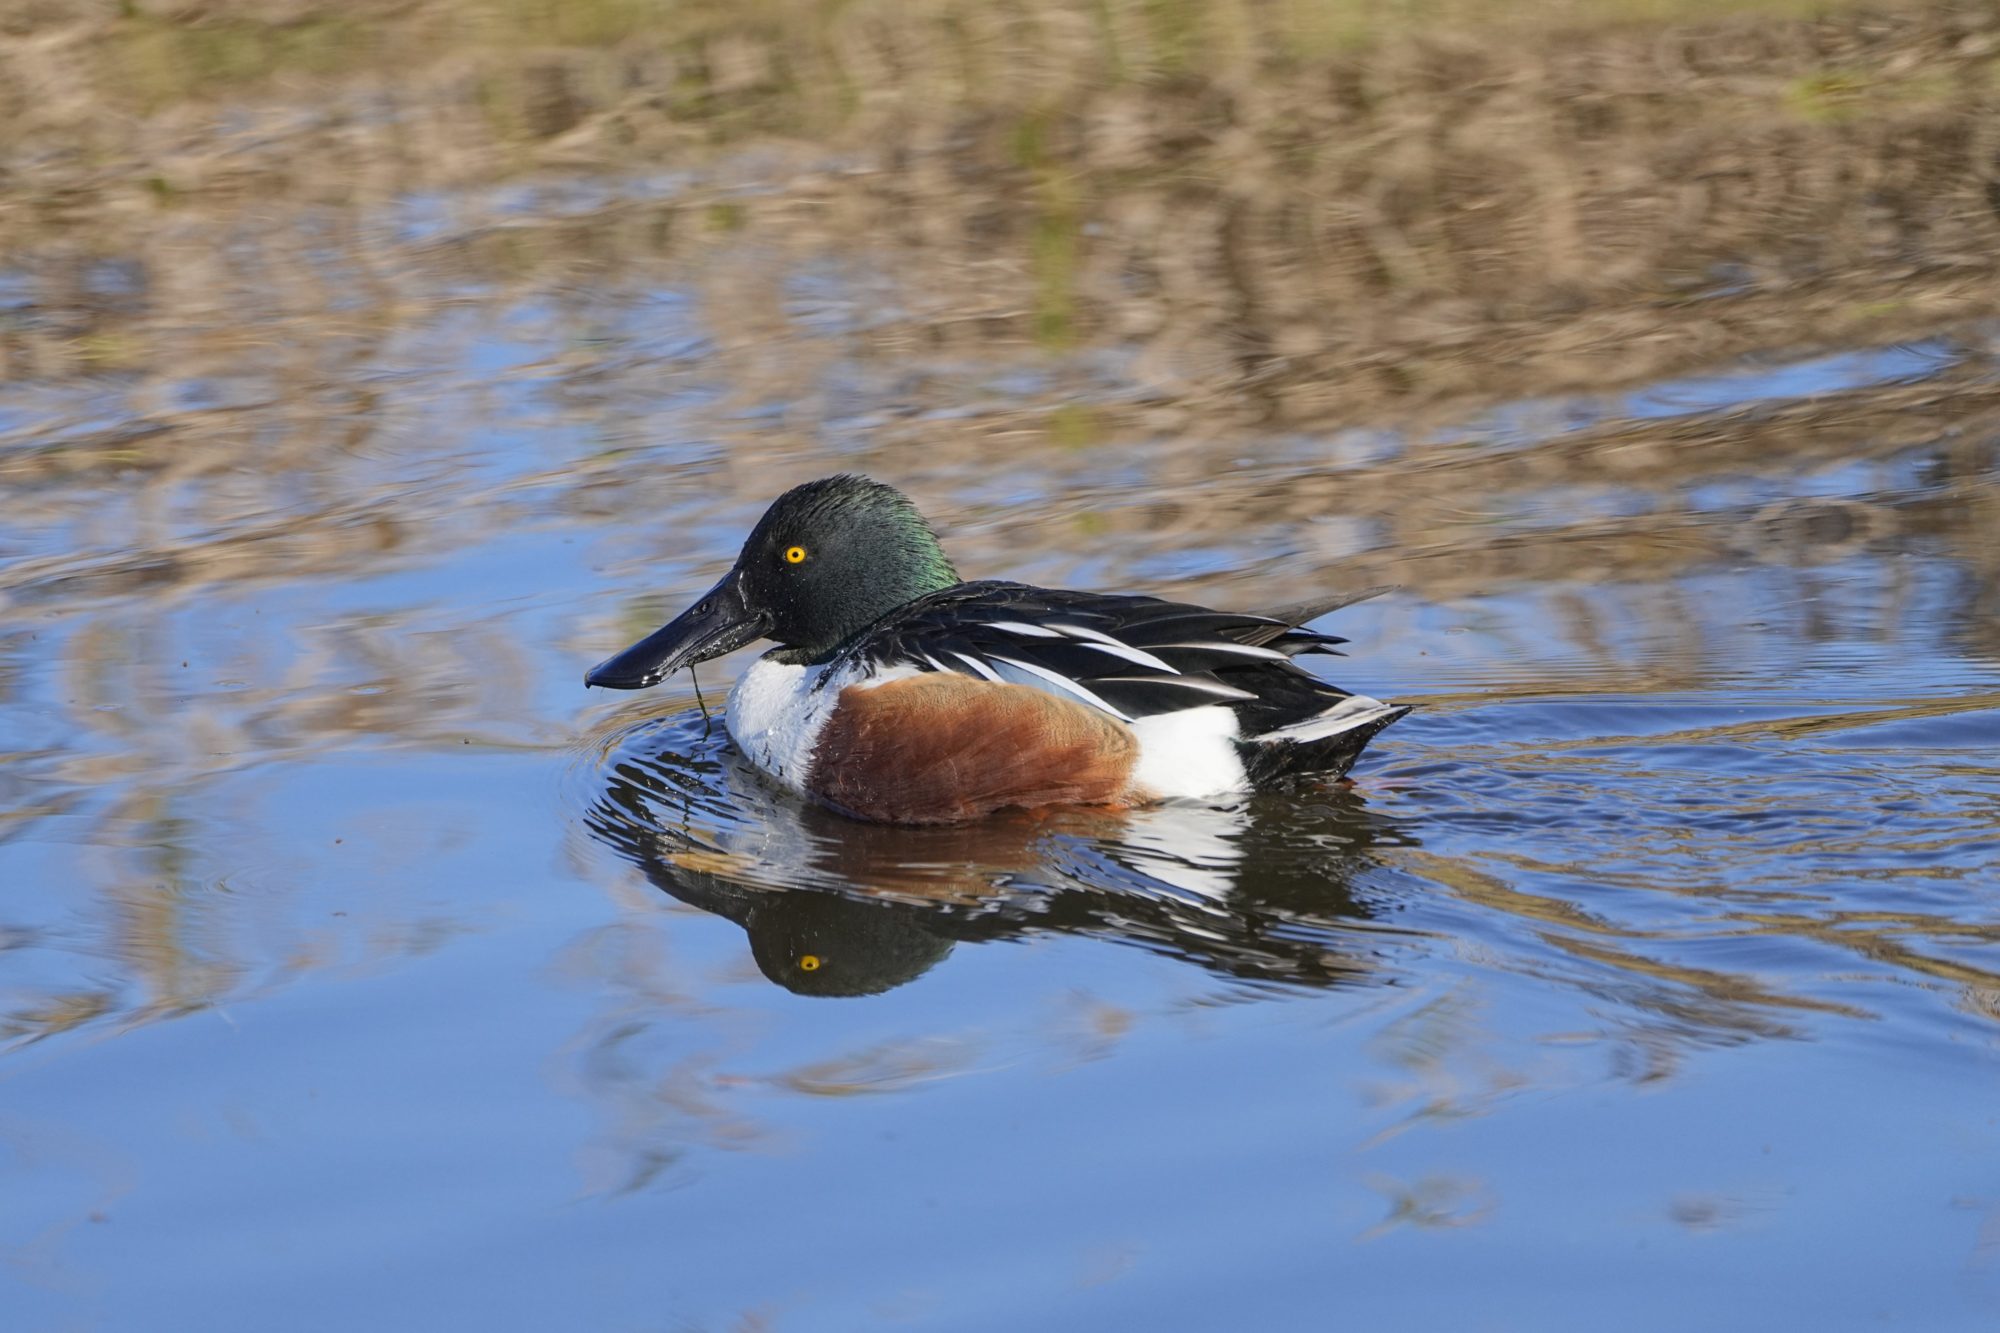 A male Northern Shoveler is swimming on the water. There is some black gunk dripping from its bill